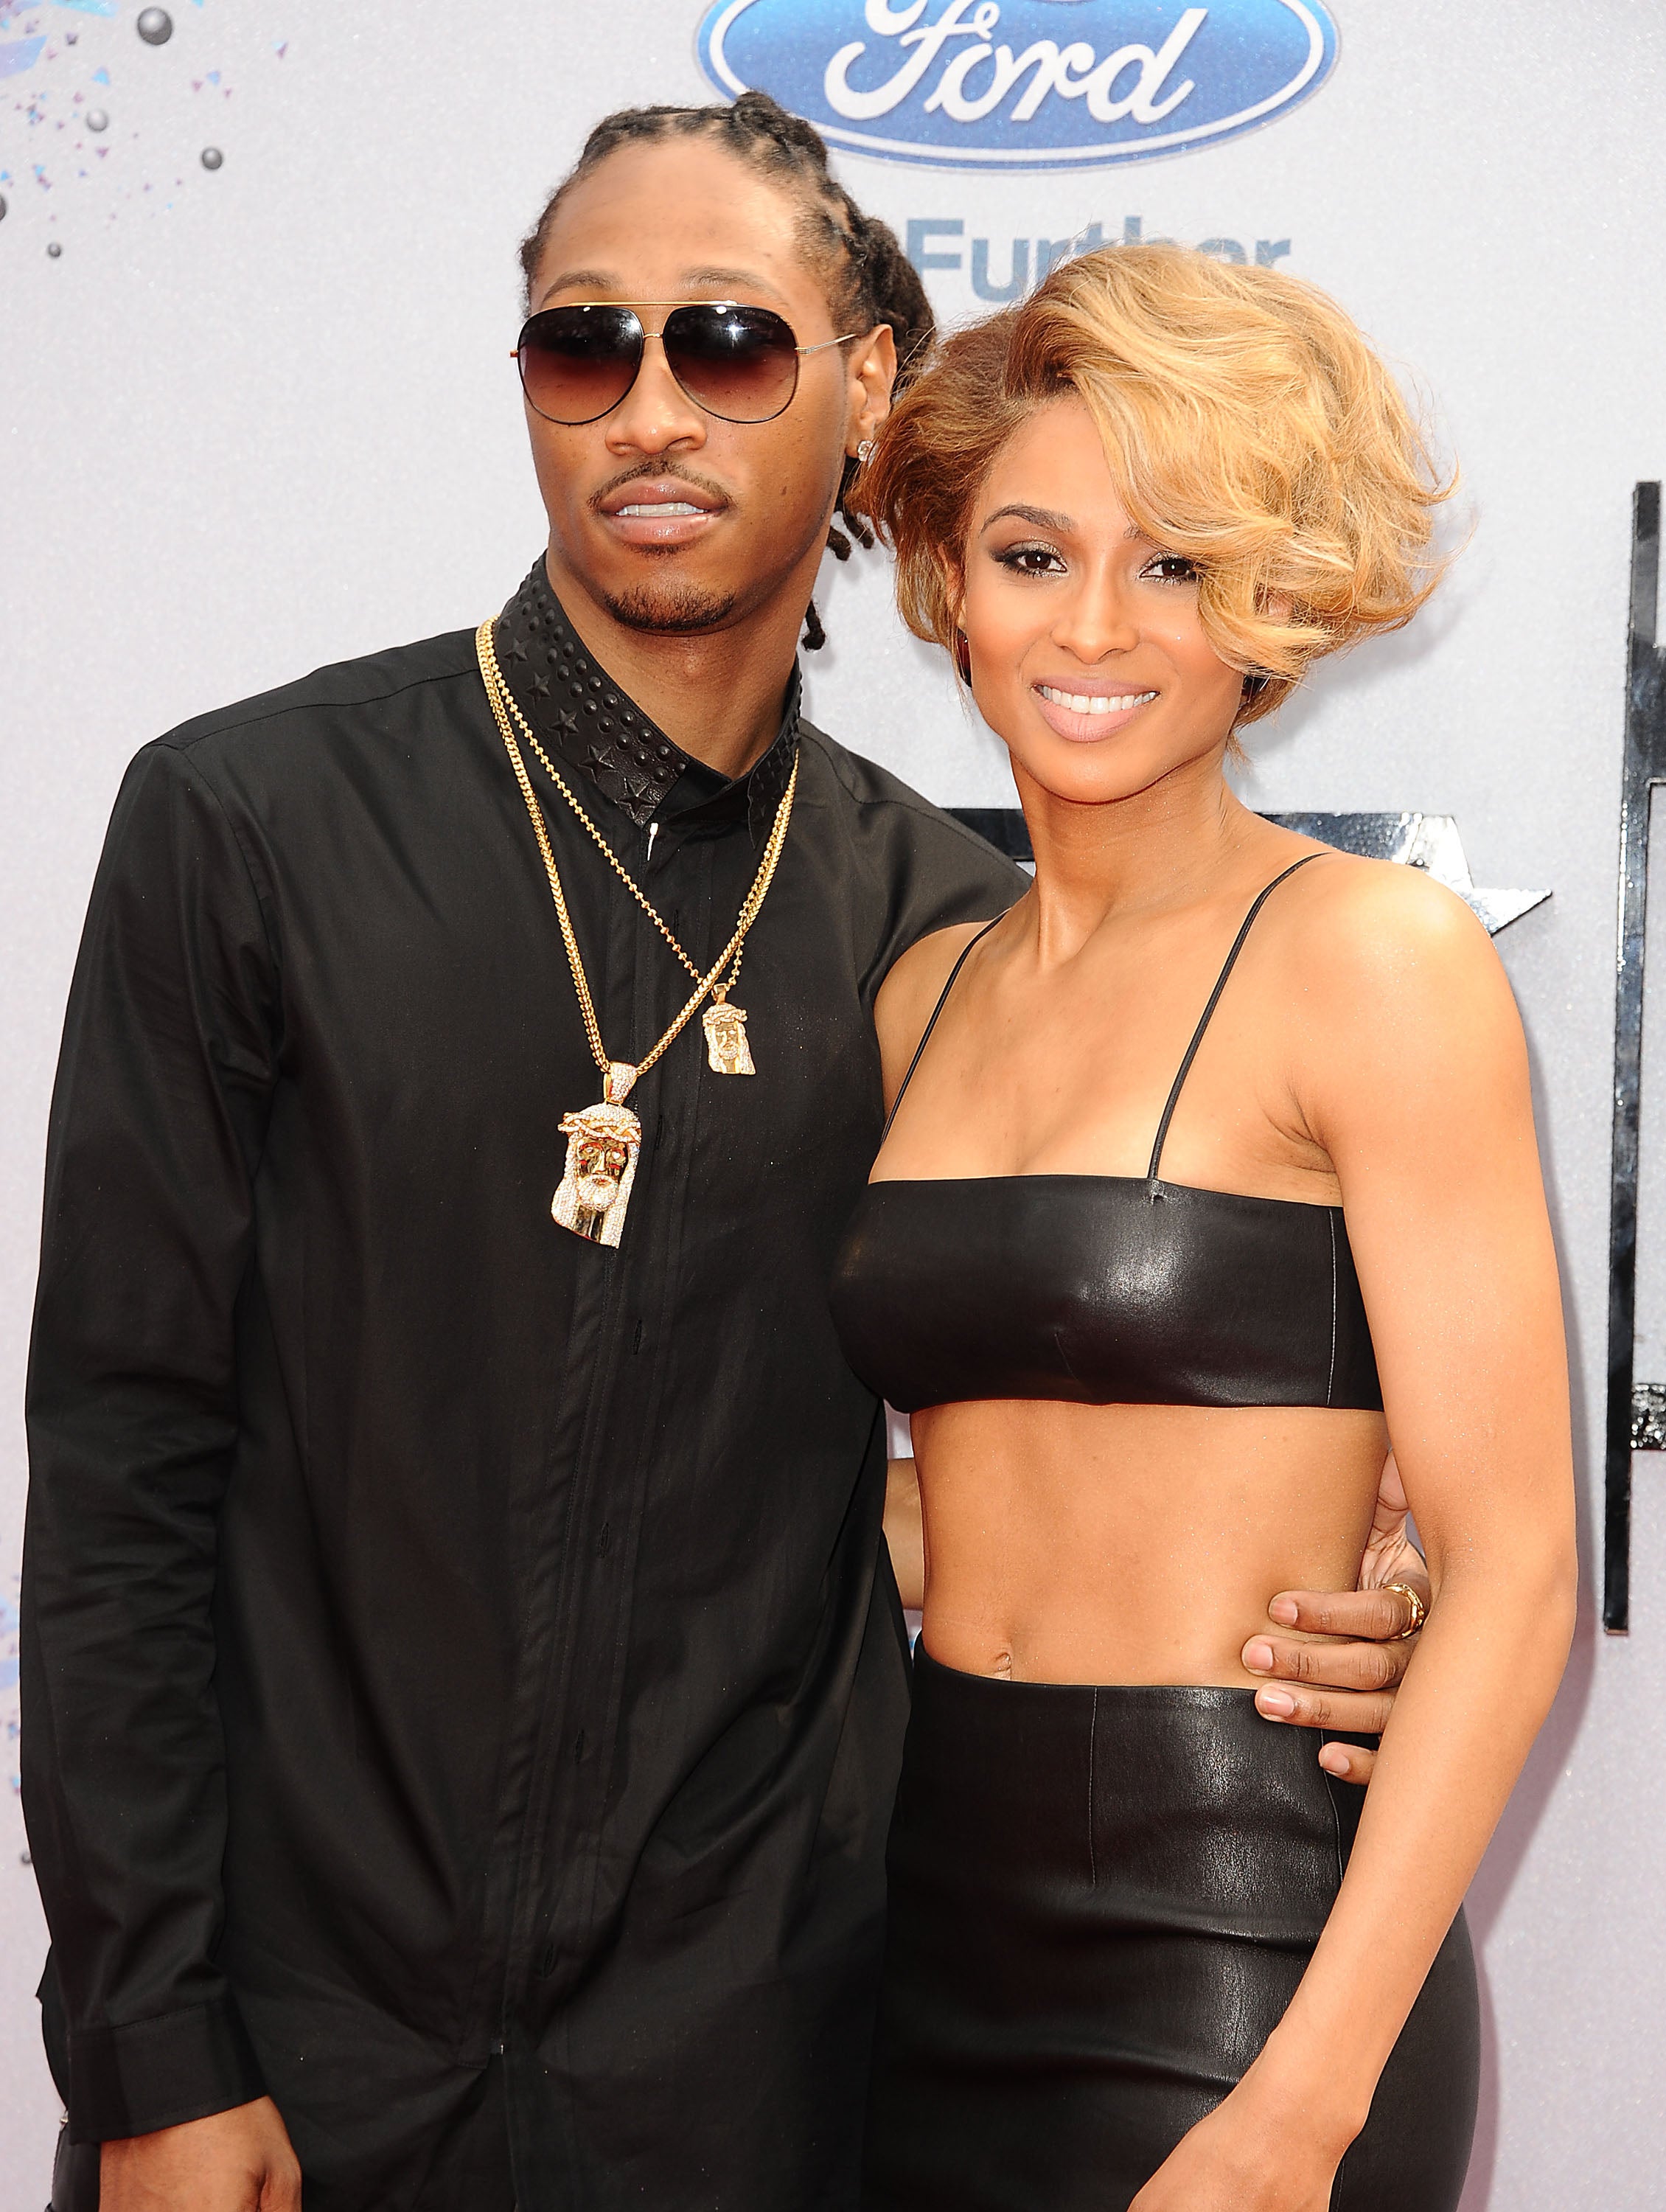 Black Women and Single Motherhood: Why Ciara’s Lawsuit Against Future Matters